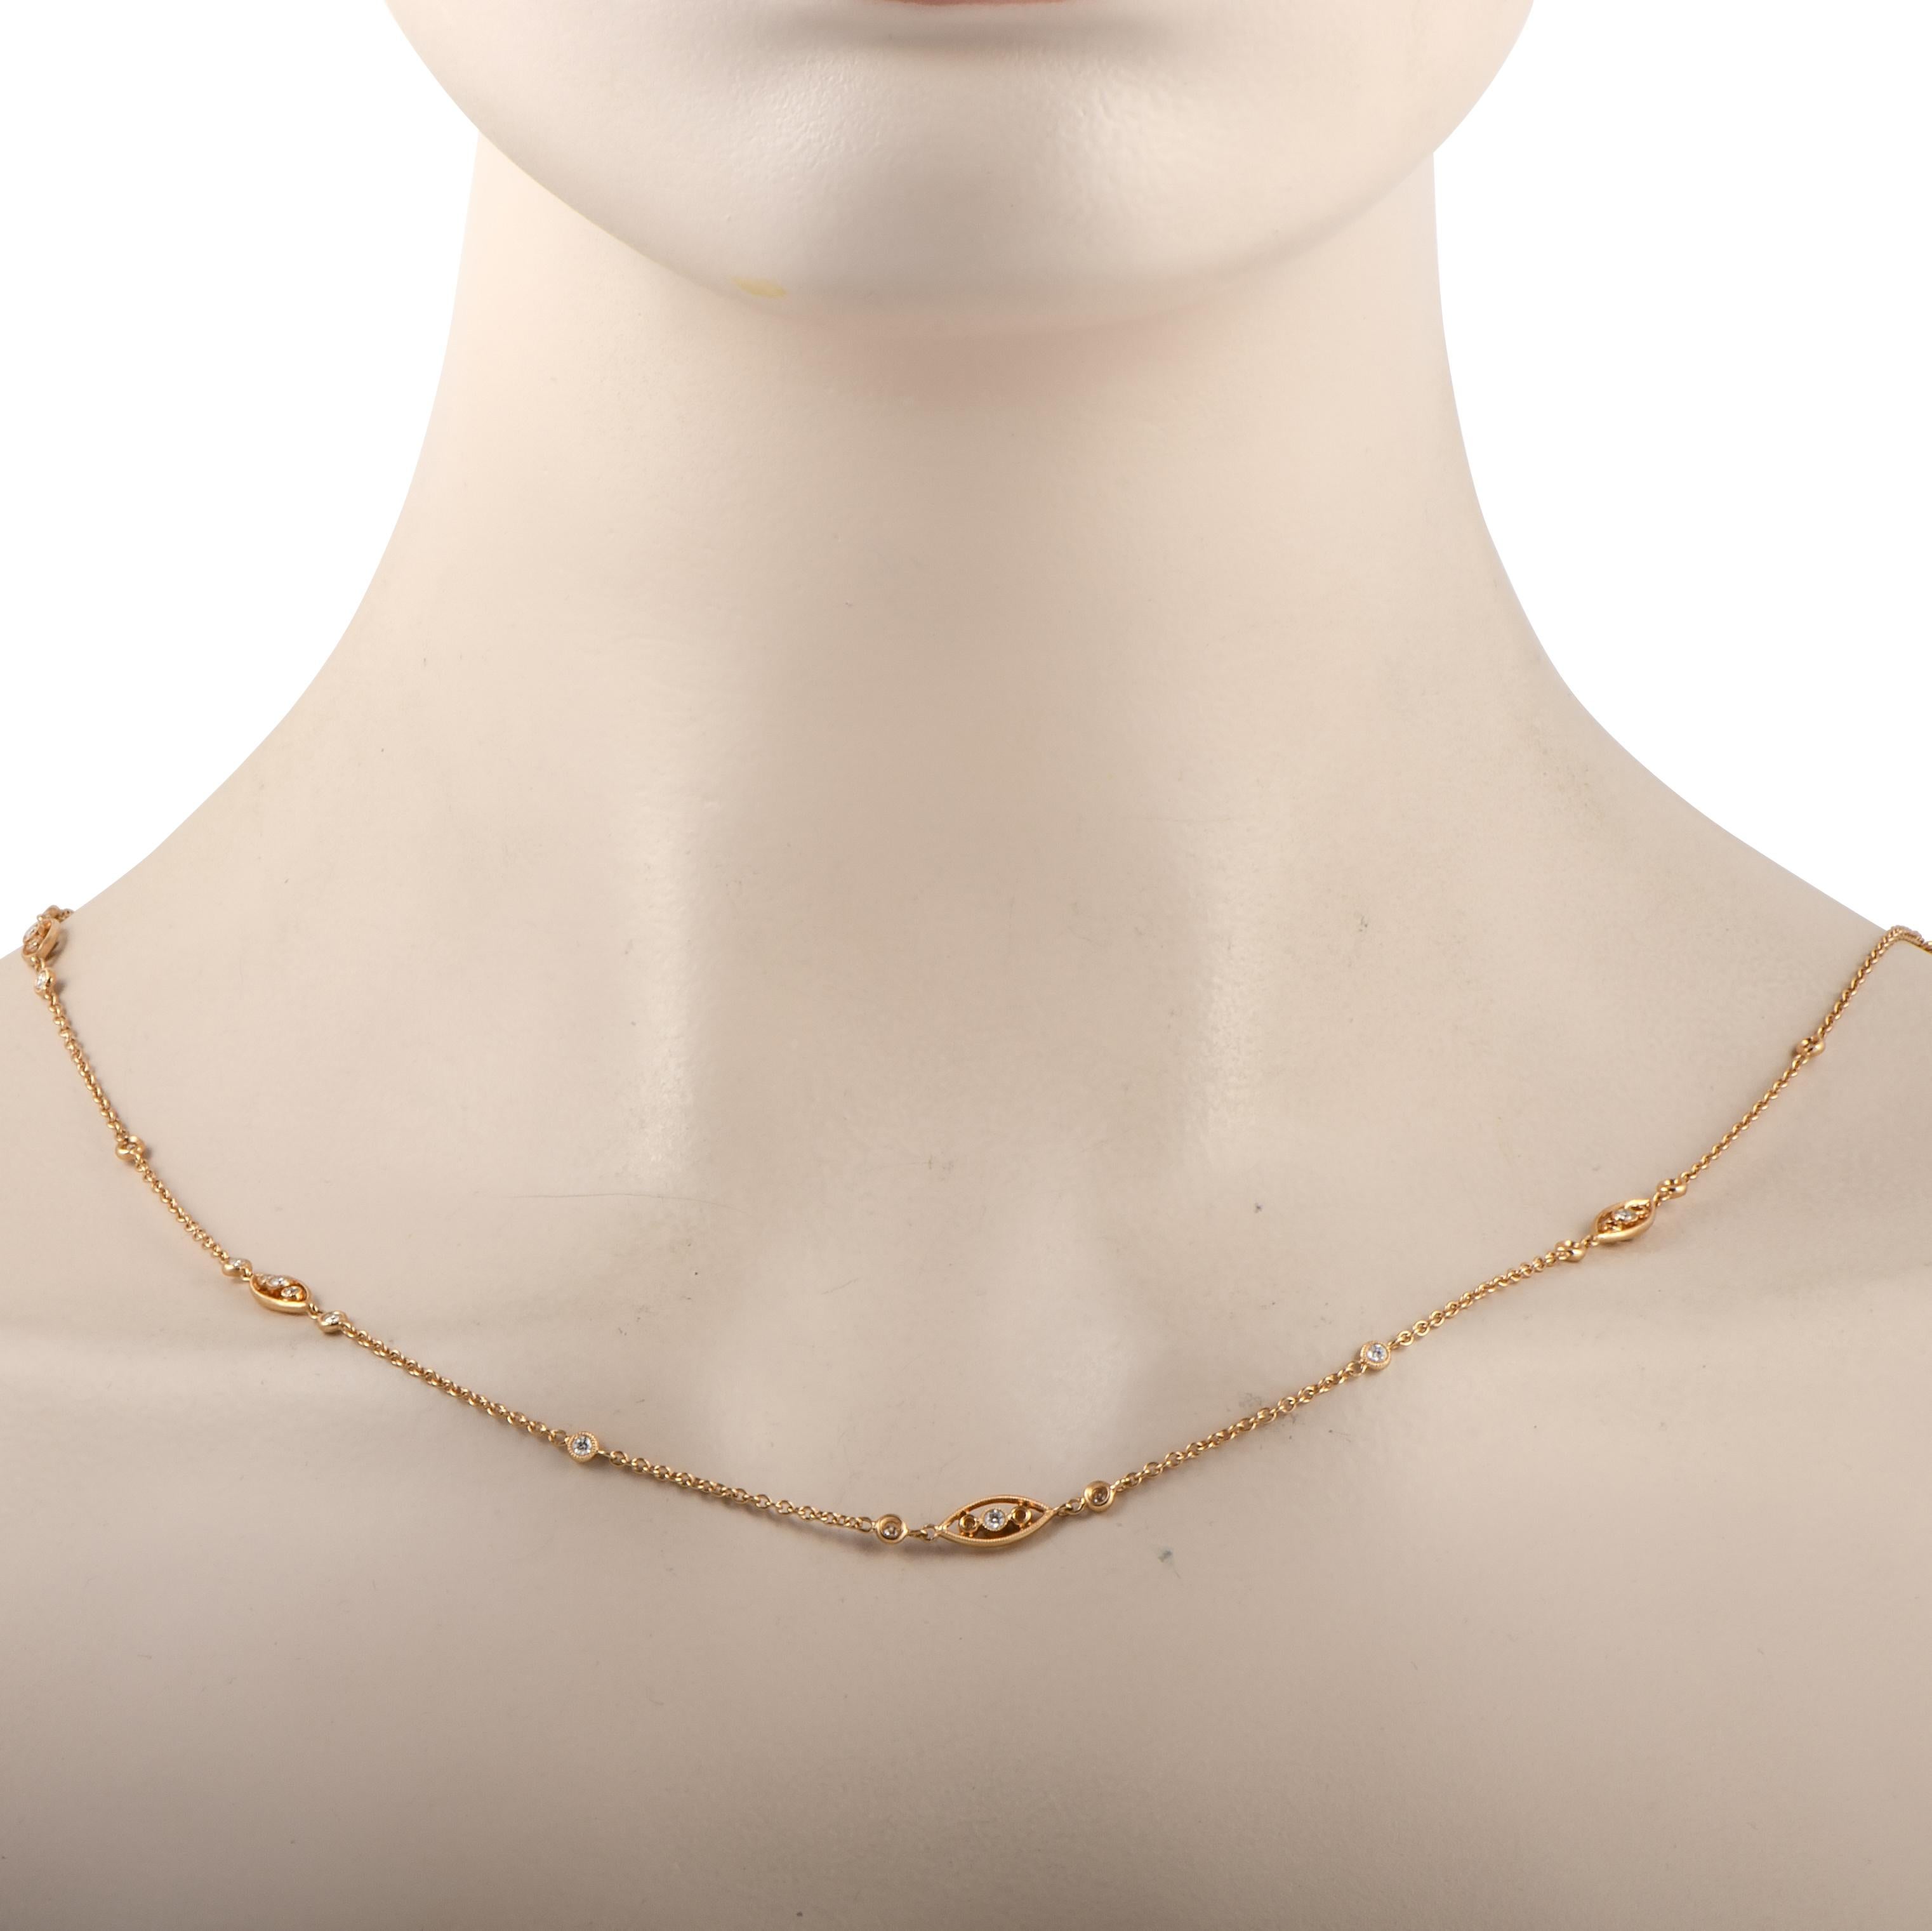 This LB Exclusive necklace is crafted from 18K rose gold and set with a total of 1.50 carats of diamonds. The necklace weighs 14.8 grams and measures 34” in length.

Offered in brand new condition, this jewelry piece includes a gift box.